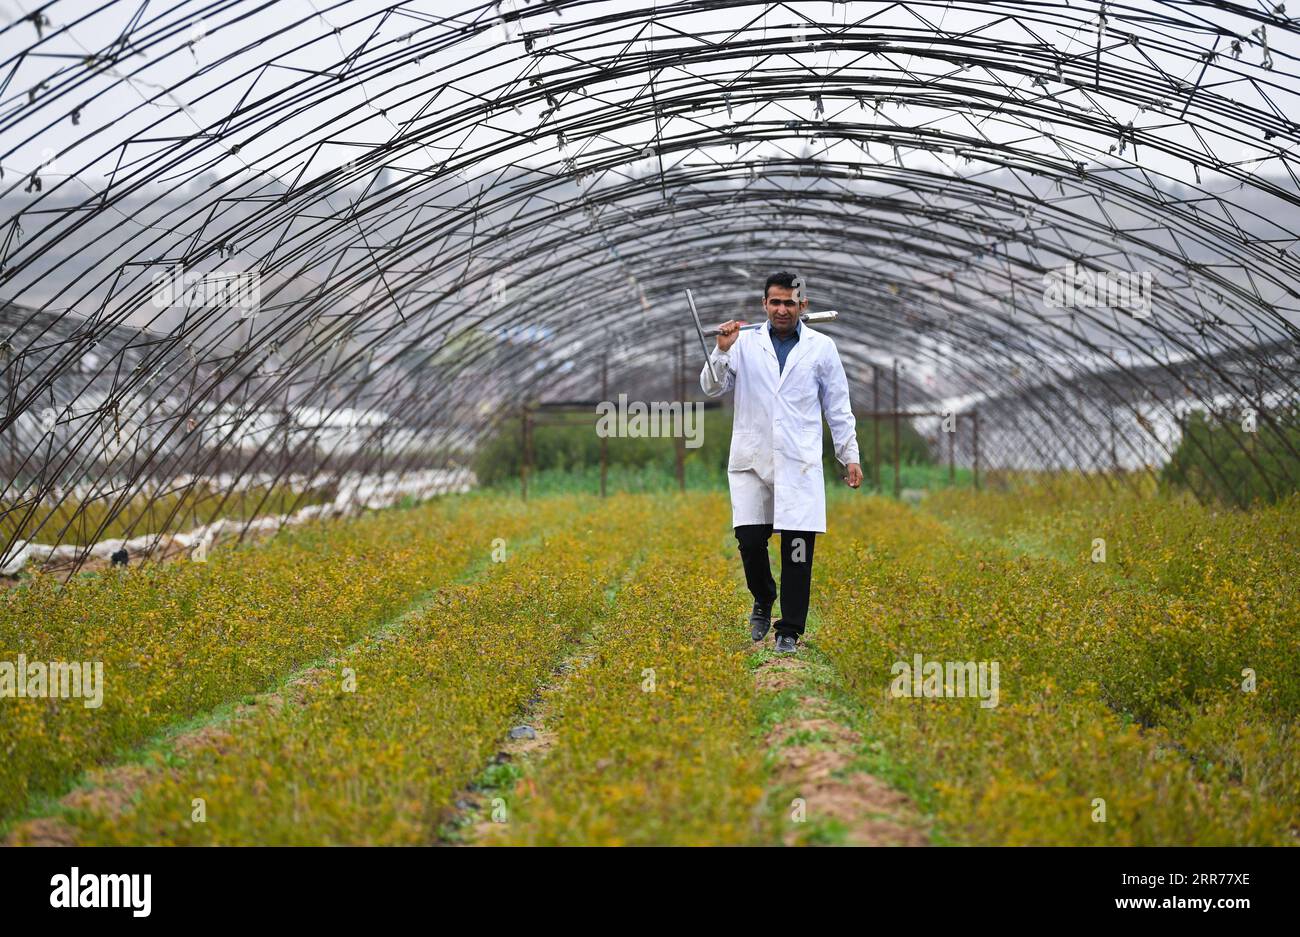 210318 -- XI AN, March 18, 2021 -- Abdul Ghaffar Shar walks in the fields in Yangling agricultural hi-tech industrial demonstration zone in northwest China s Shaanxi Province, March 17, 2021. Abdul Ghaffar Shar, 30, is a Pakistani doctoral student in China s Northwest Agriculture and Forestry University NWAFU. Shar is doing plant nutrition research for his doctoral degree. After receiving his bachelor s degree in agriculture from Sindh Agriculture University in Pakistan in 2014, Shar decided to further his studies in China s NWAFU. Shar has learned to speak Mandarin and use chopsticks. He also Stock Photo